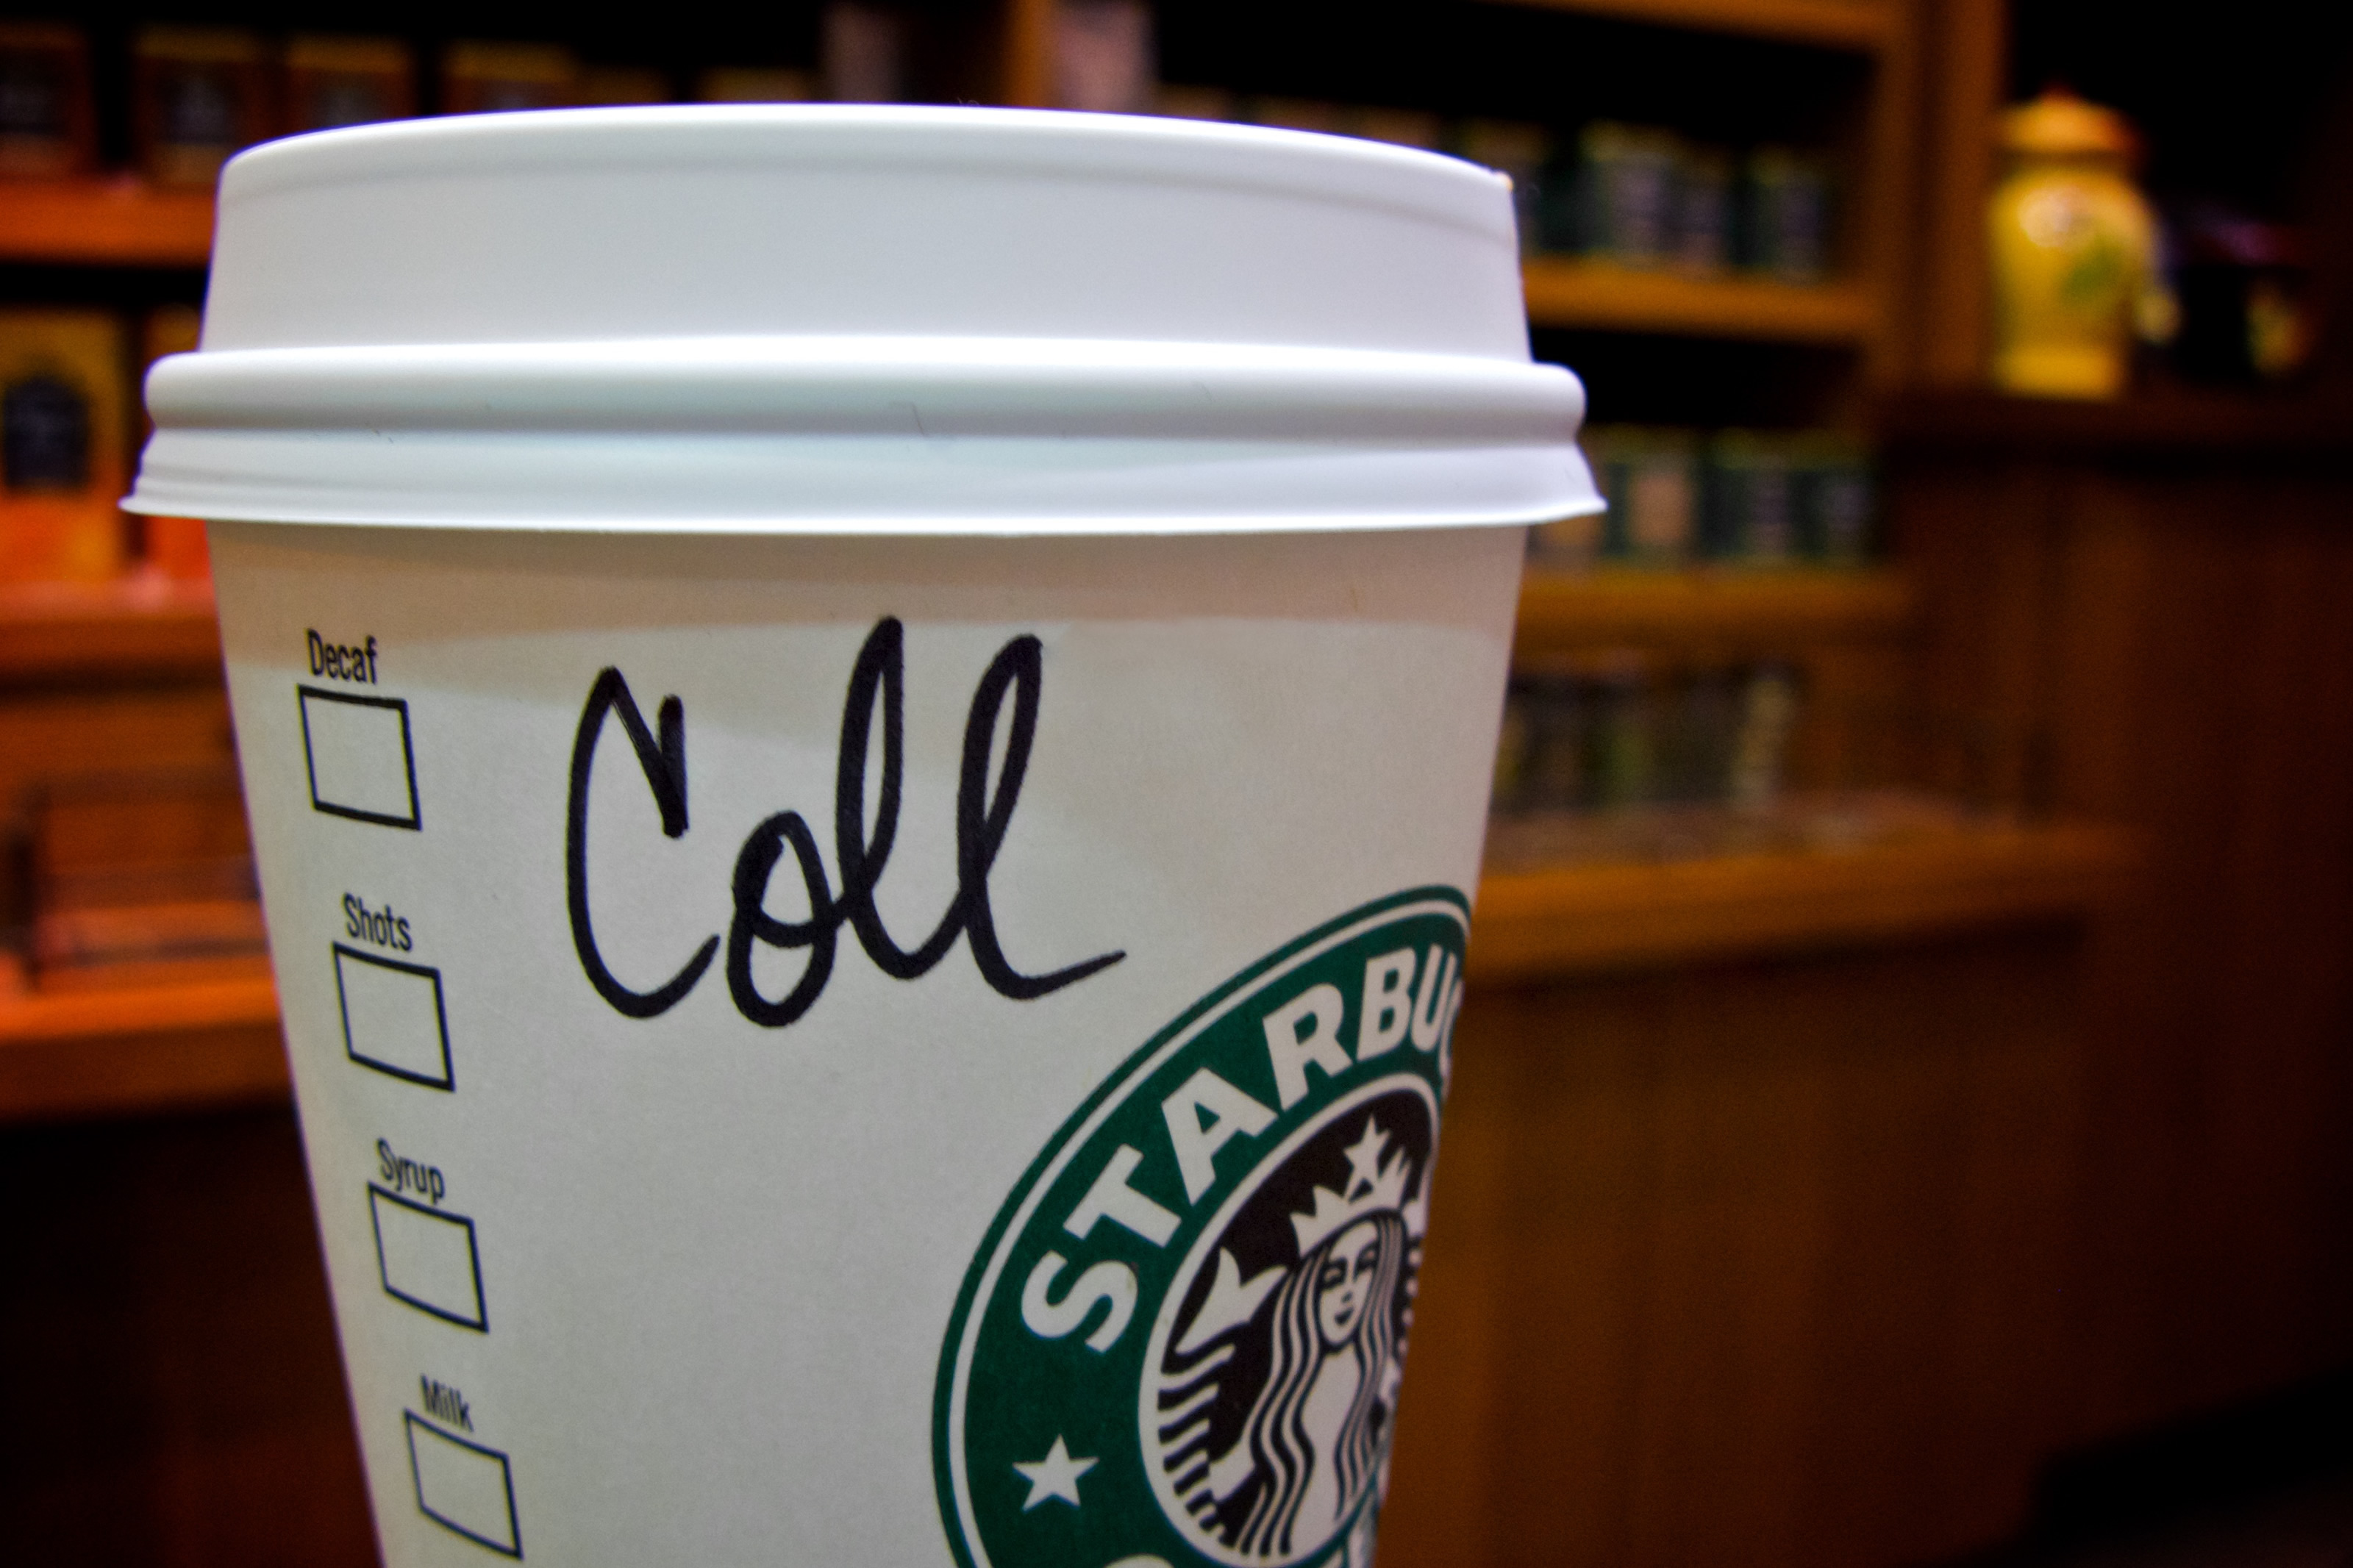 'Coll' written on the side of a Starbucks cup